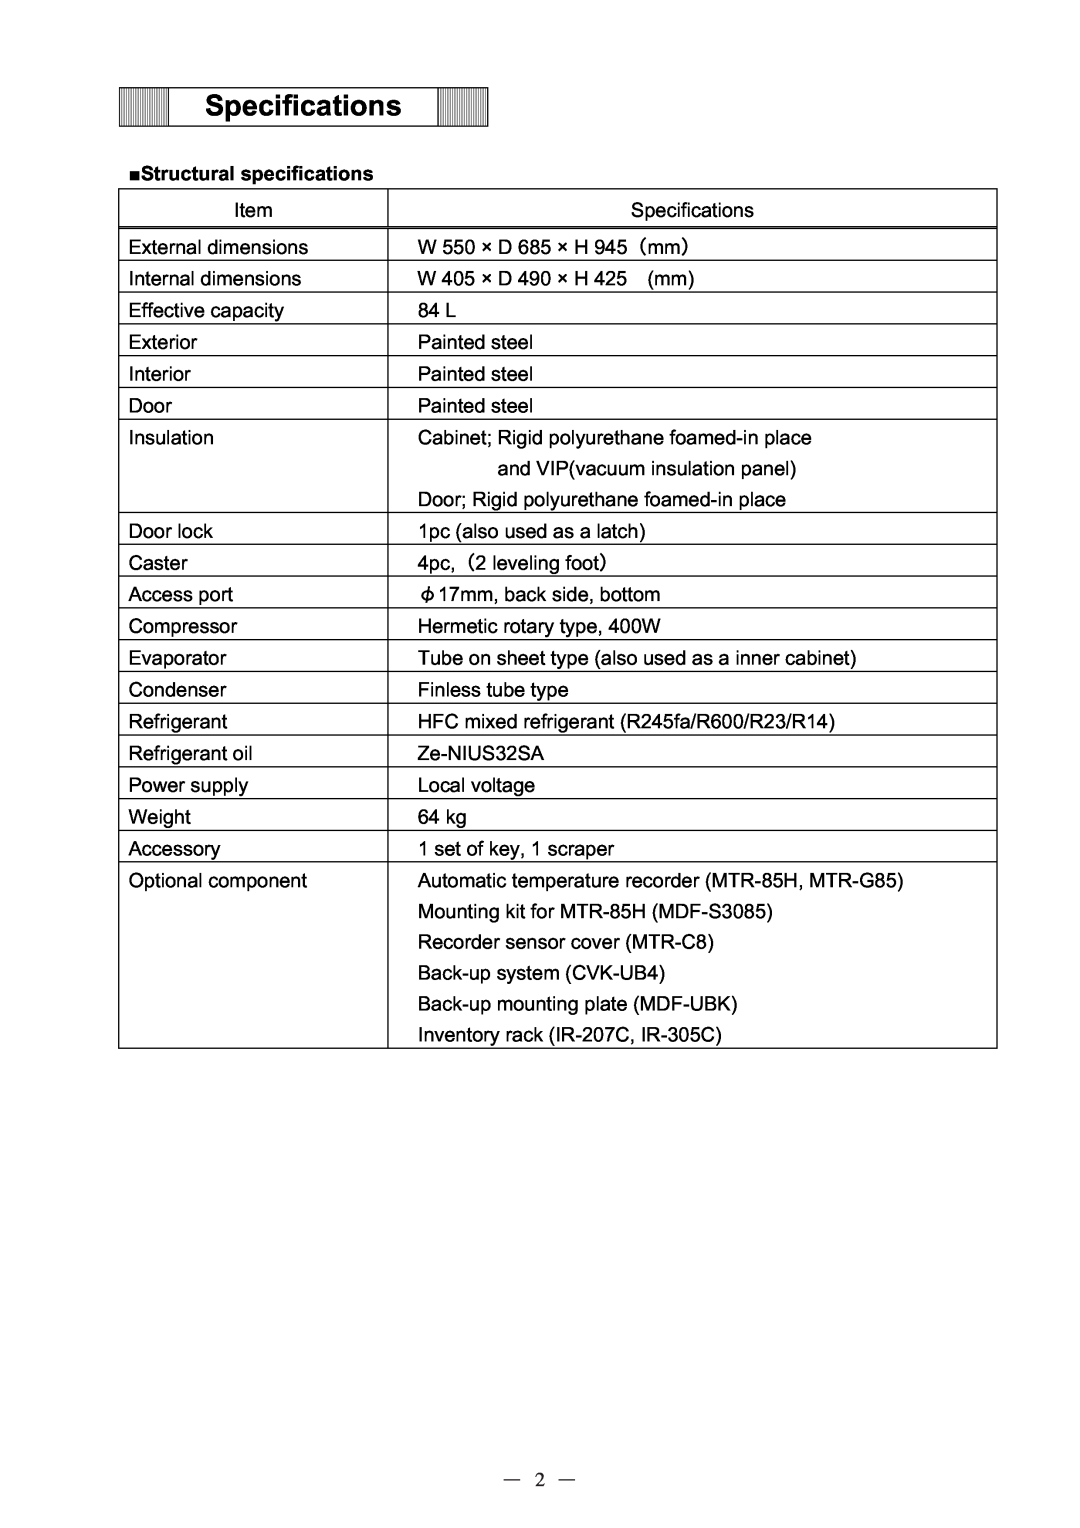 Sanyo MDF-C8V service manual Specifications, ŶStructural specifications 